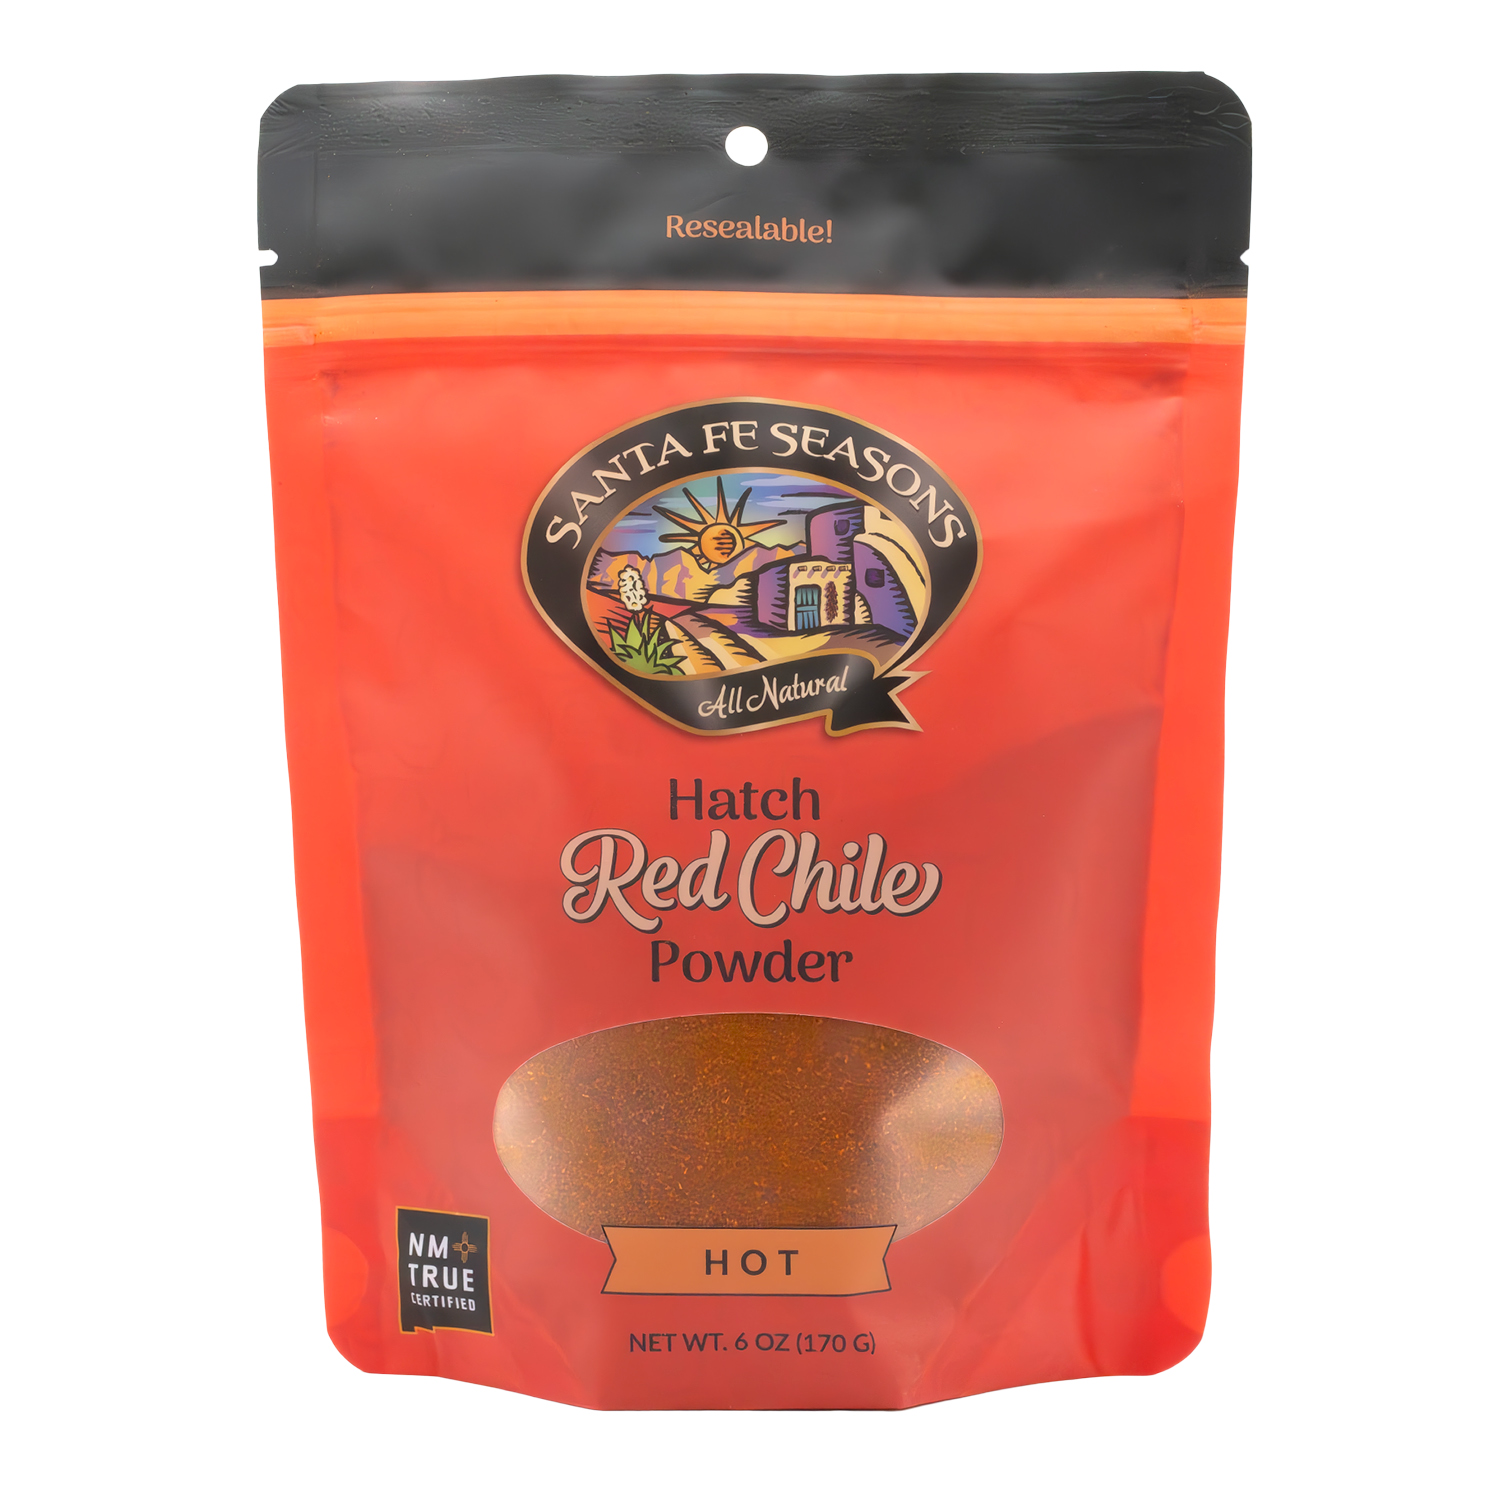 Product image of hot red chile powder